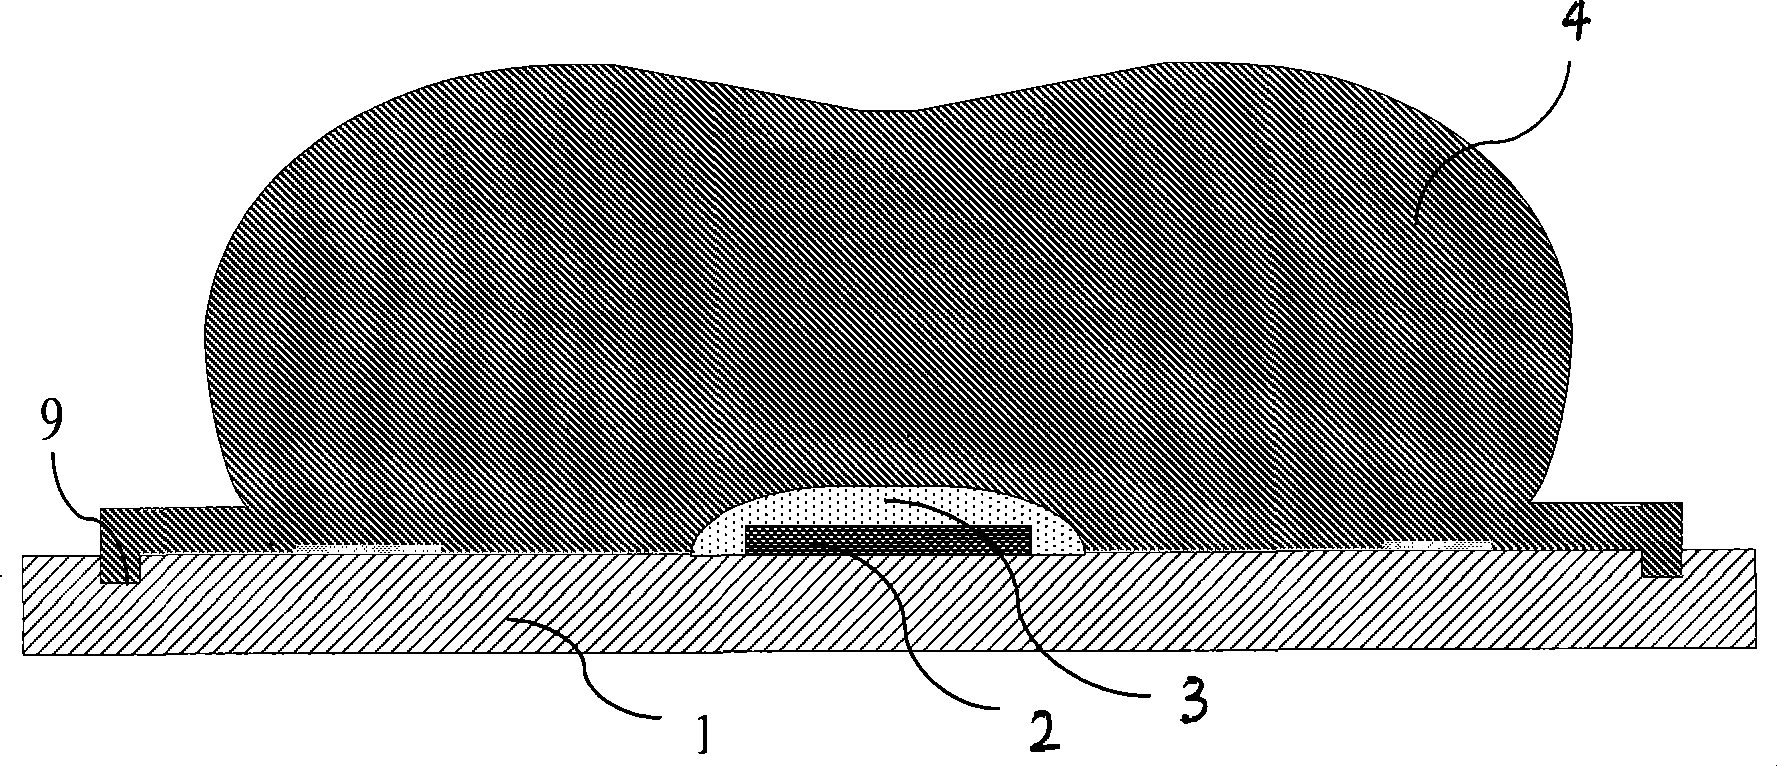 Encapsulation structure and method for applying guidance type light emitting diode device